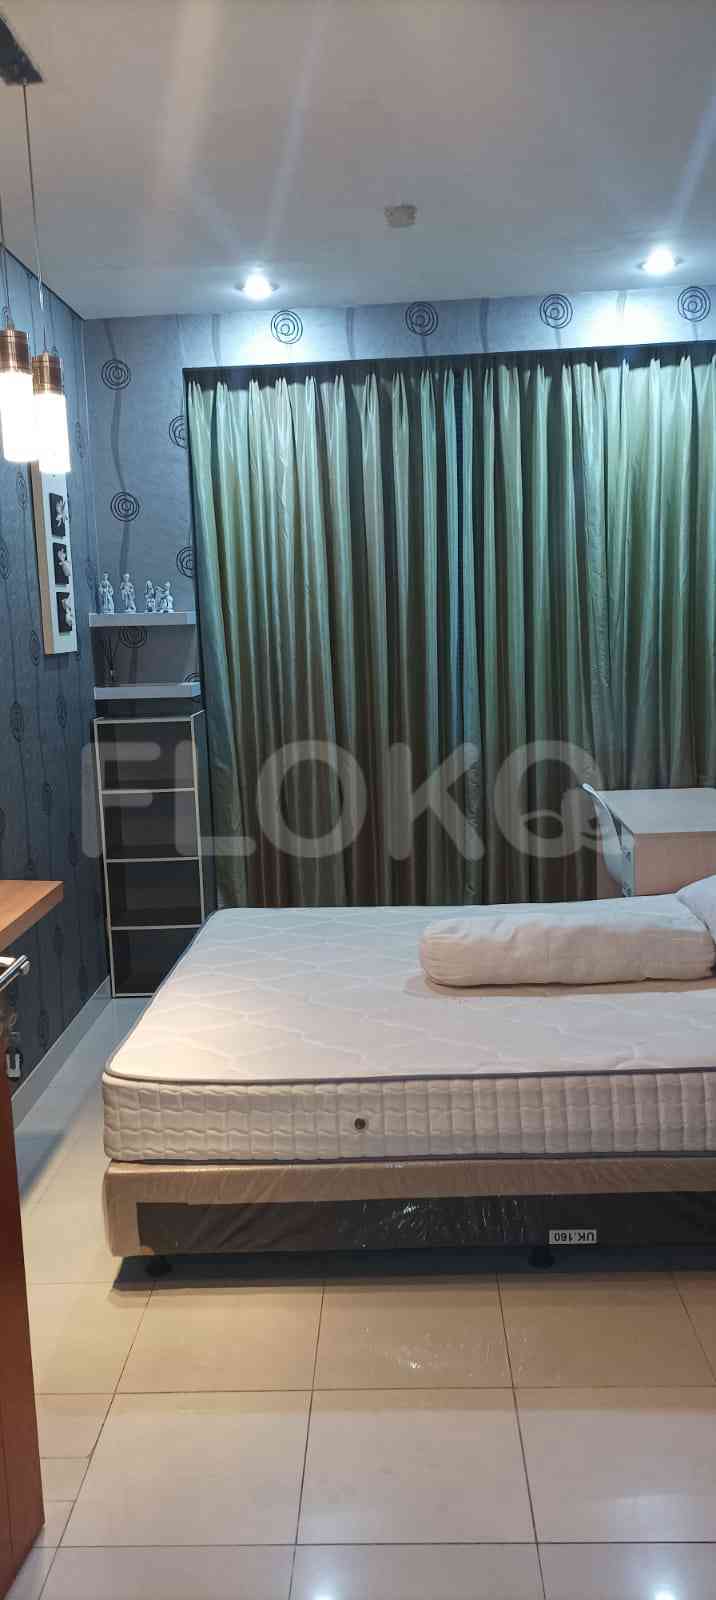 2 Bedroom on 2nd Floor for Rent in Kuningan Place Apartment - fku966 3